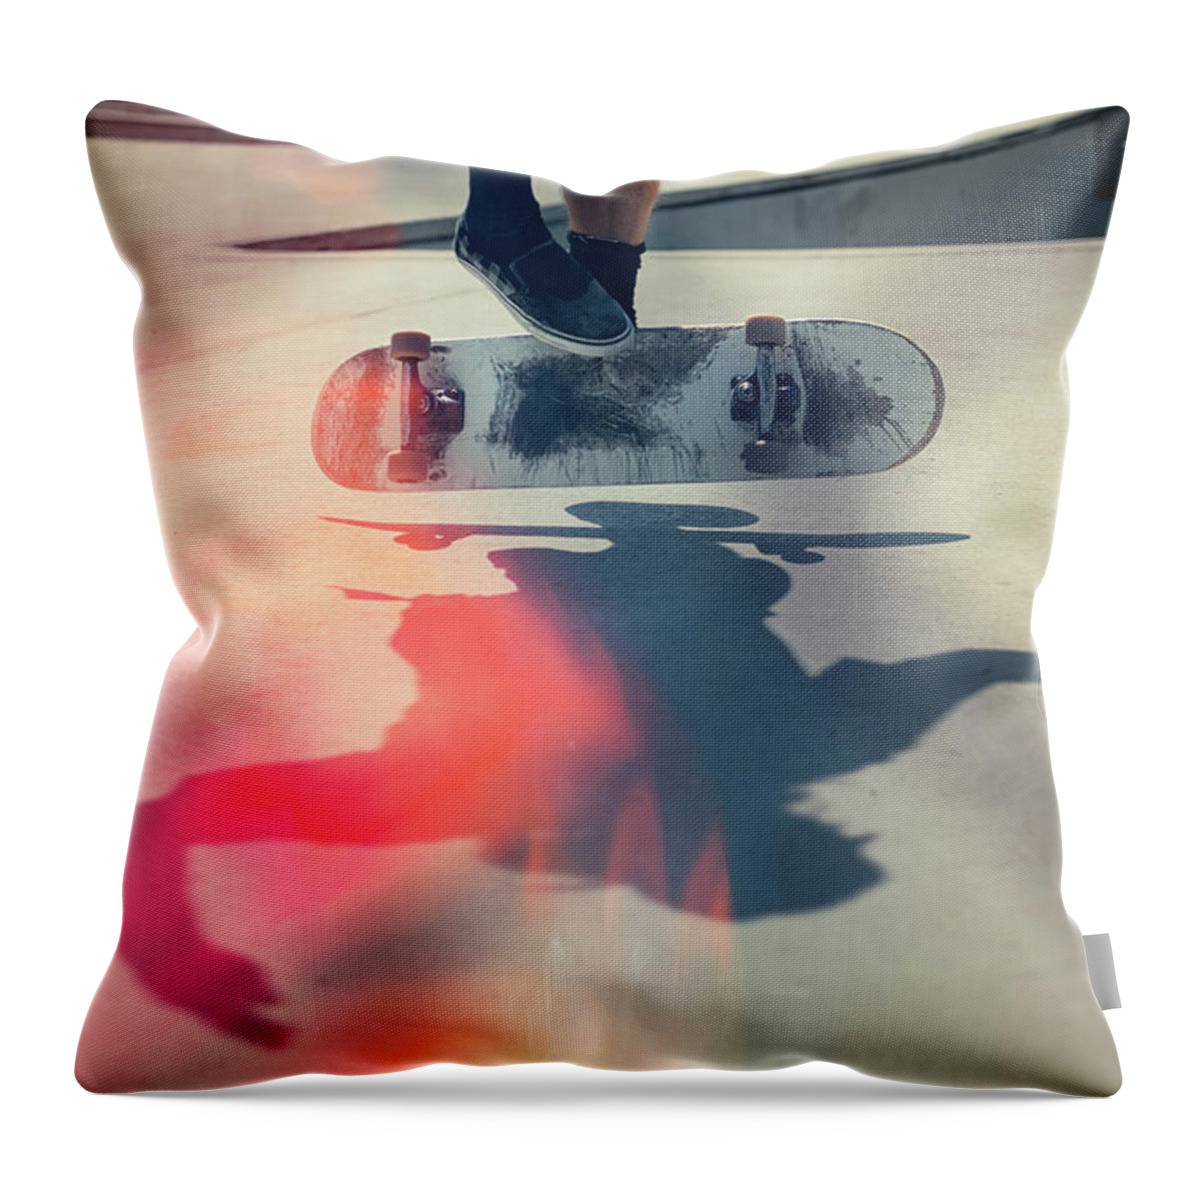 Cool Attitude Throw Pillow featuring the photograph Skateboarder Doing An Ollie by Devon Strong